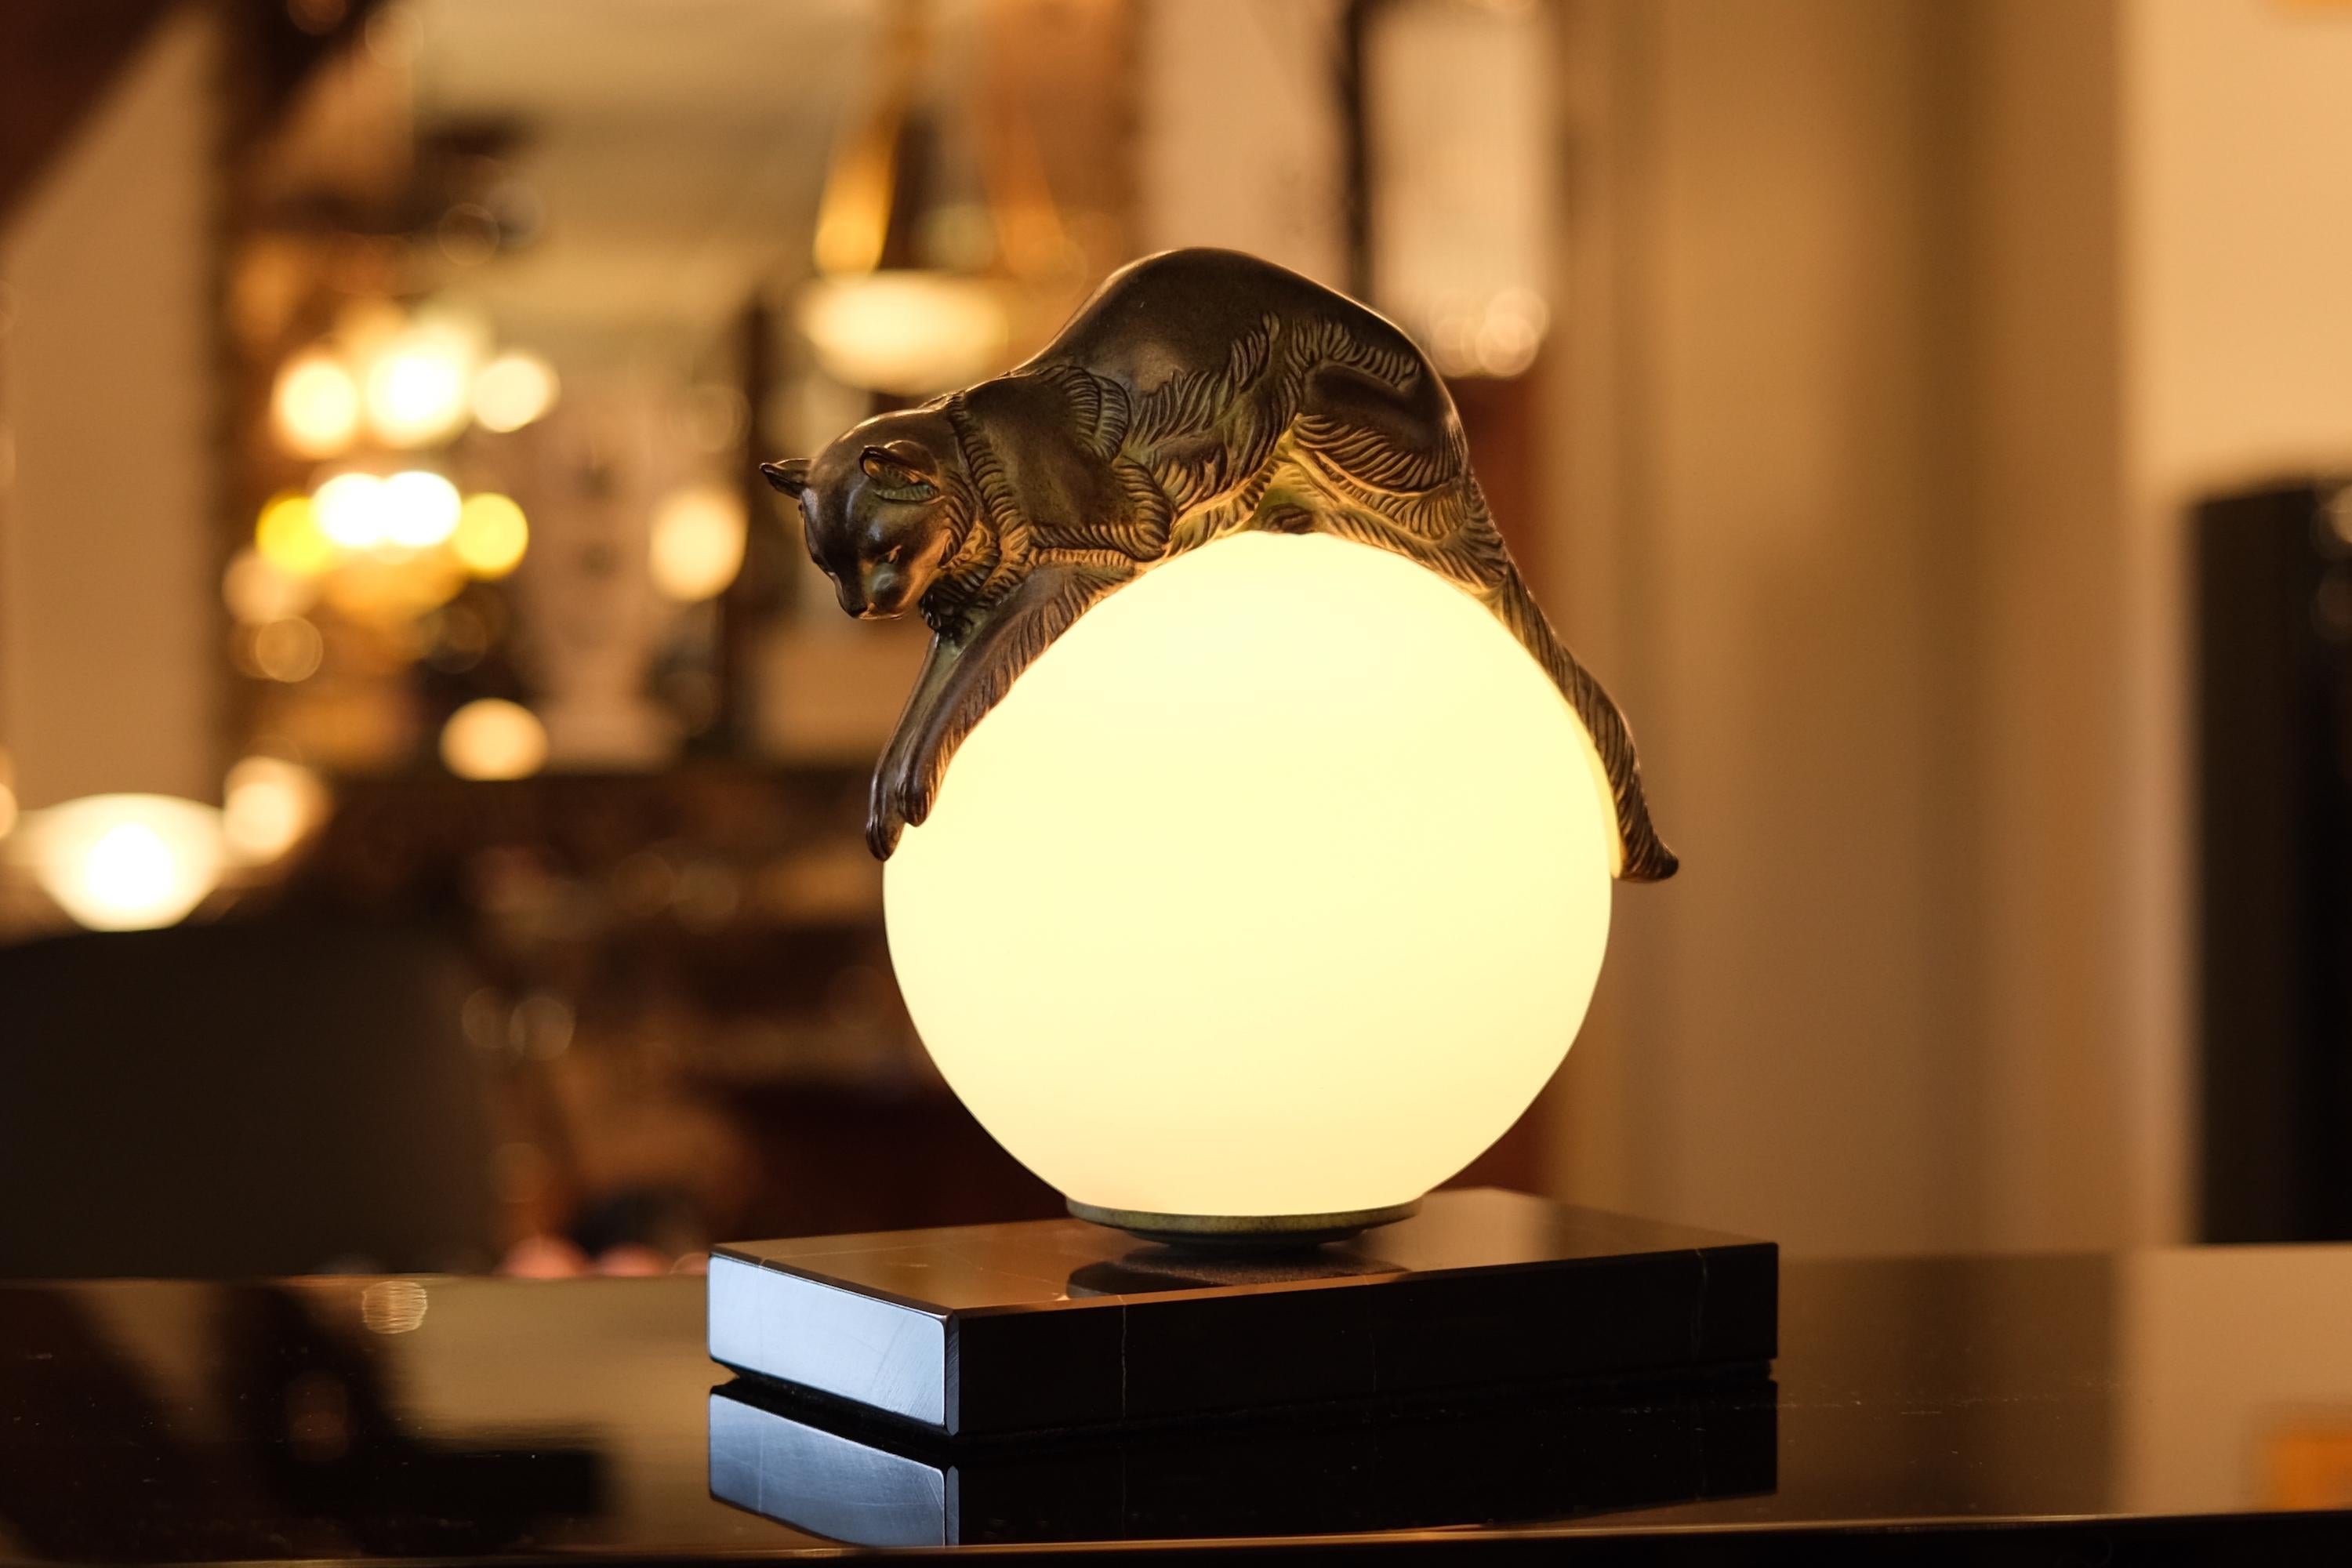 “Équilibré” (French: balanced) 
Cat keeps balance on a lighted glass ball 
Designed in the 1920s by 